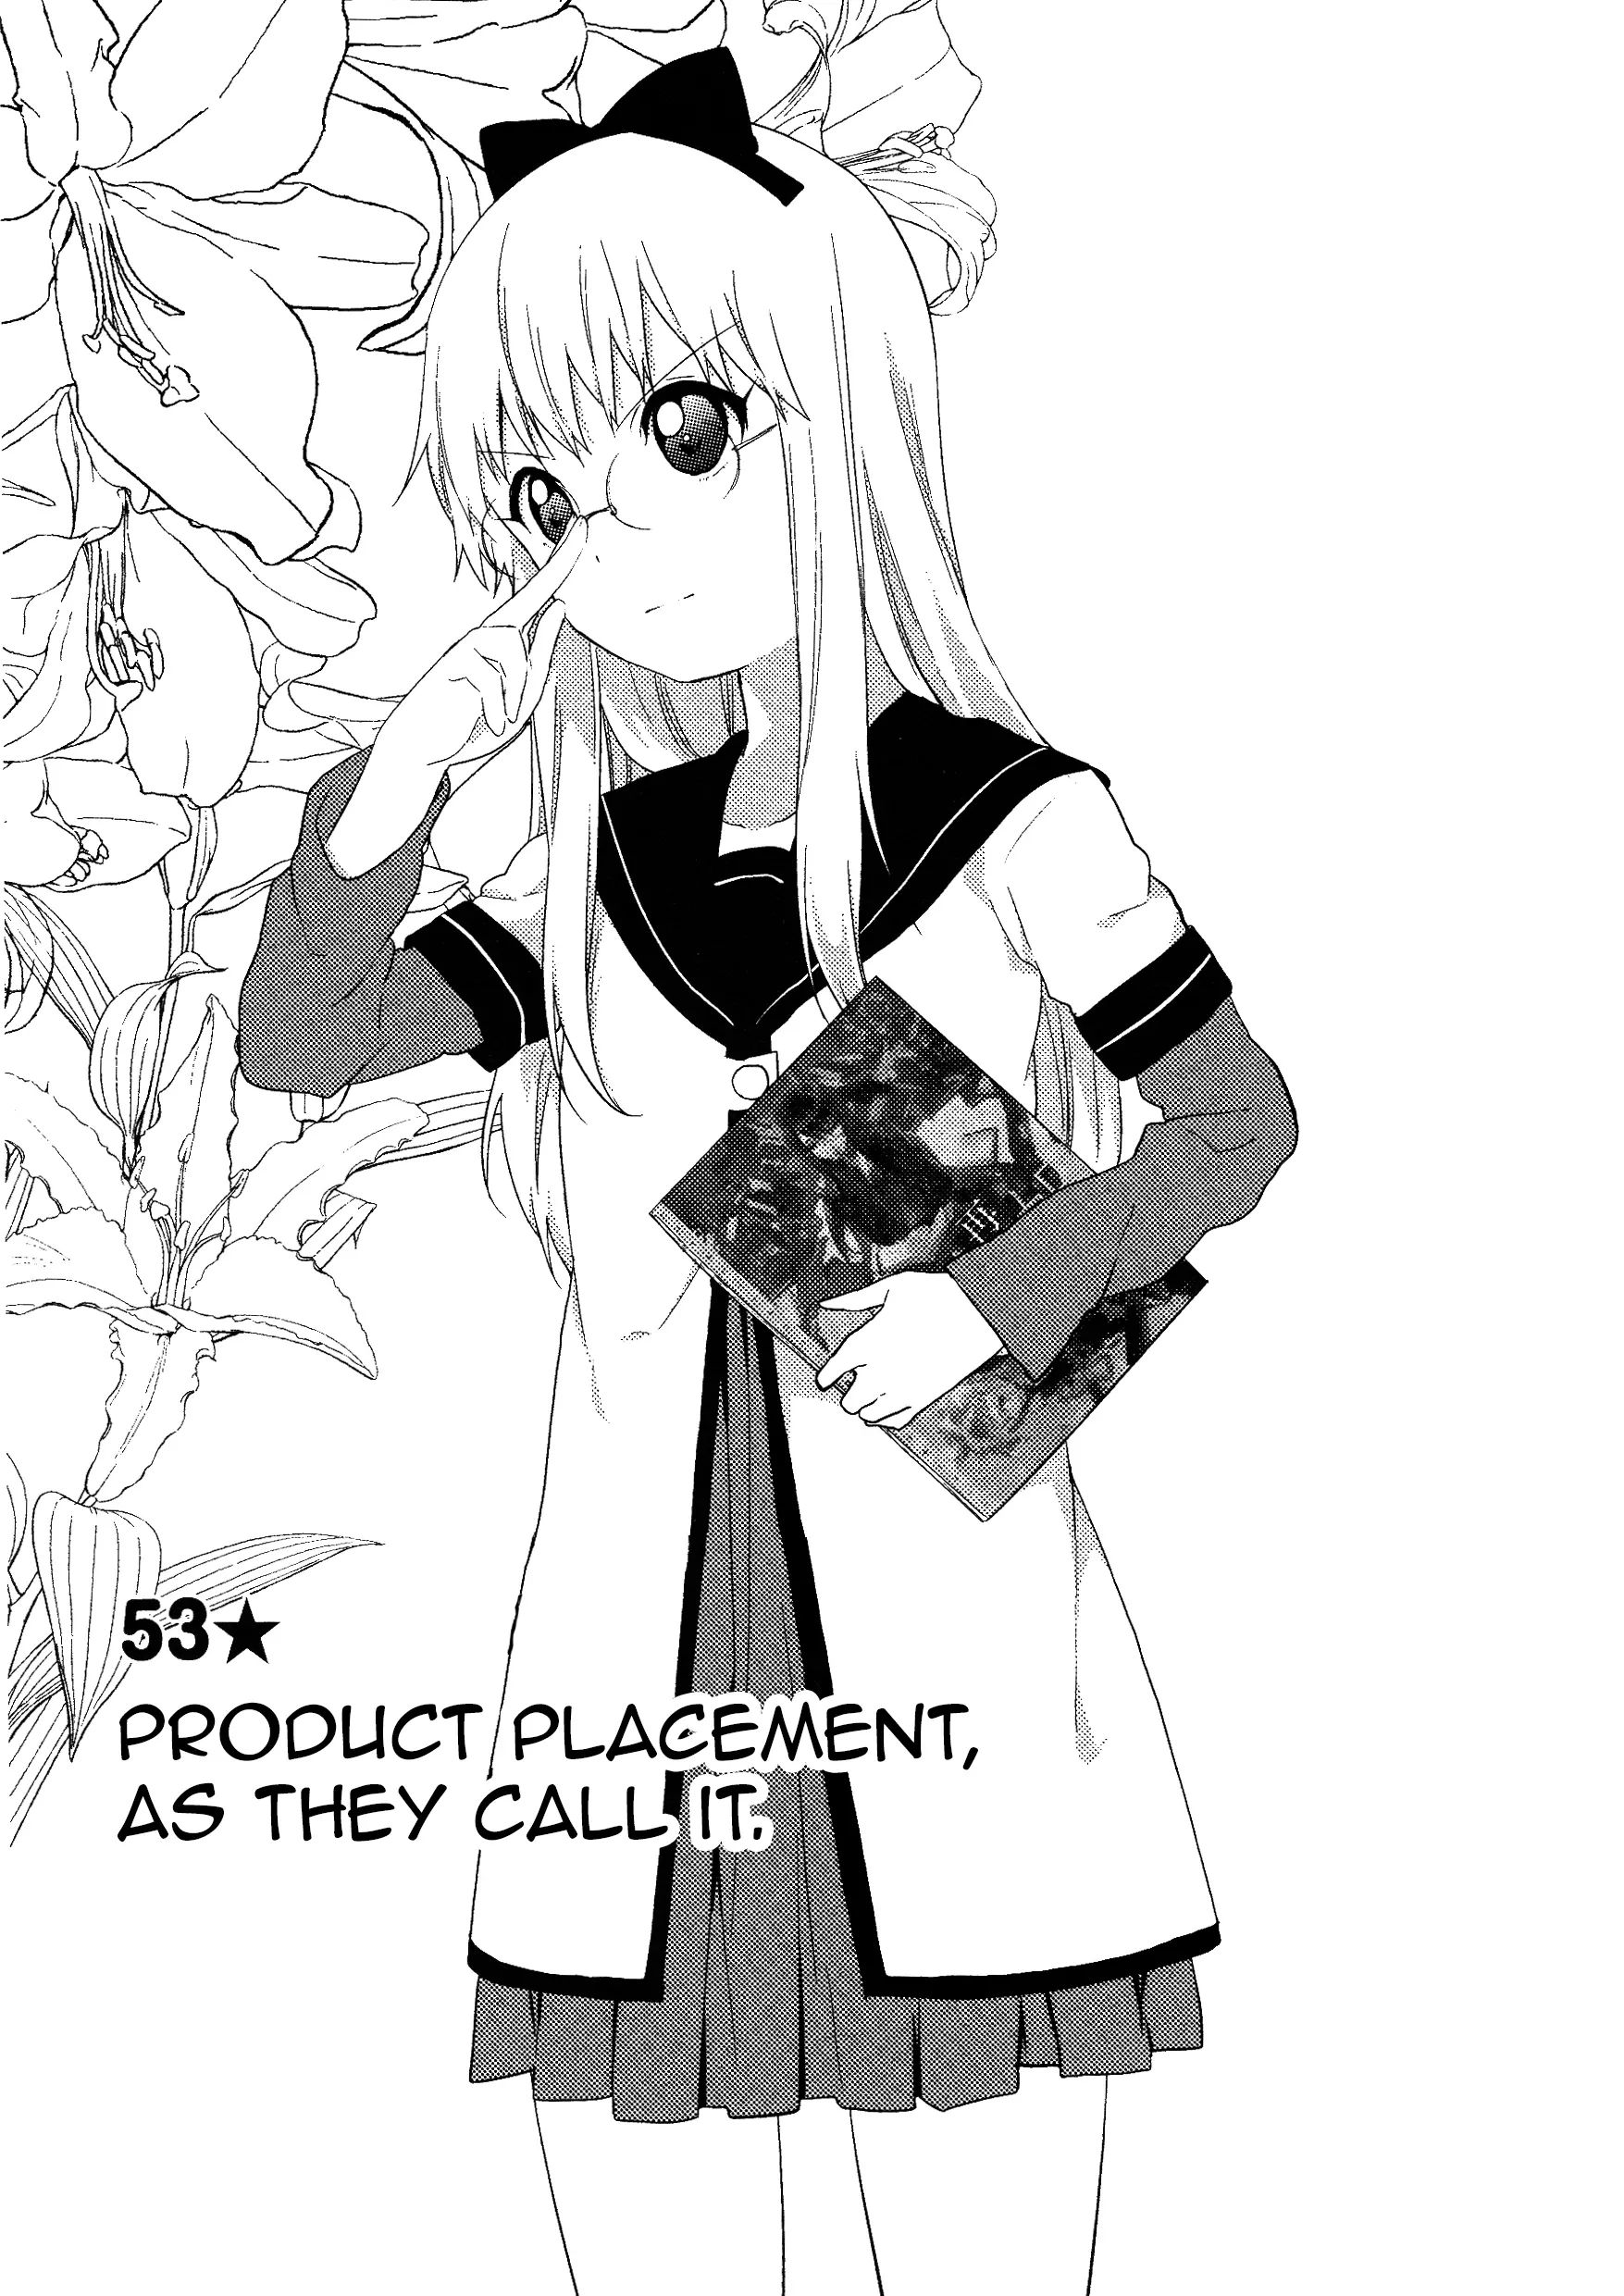 Yuru Yuri Vol.8 Chapter 53: Product Placement, As They Call It. - Picture 1